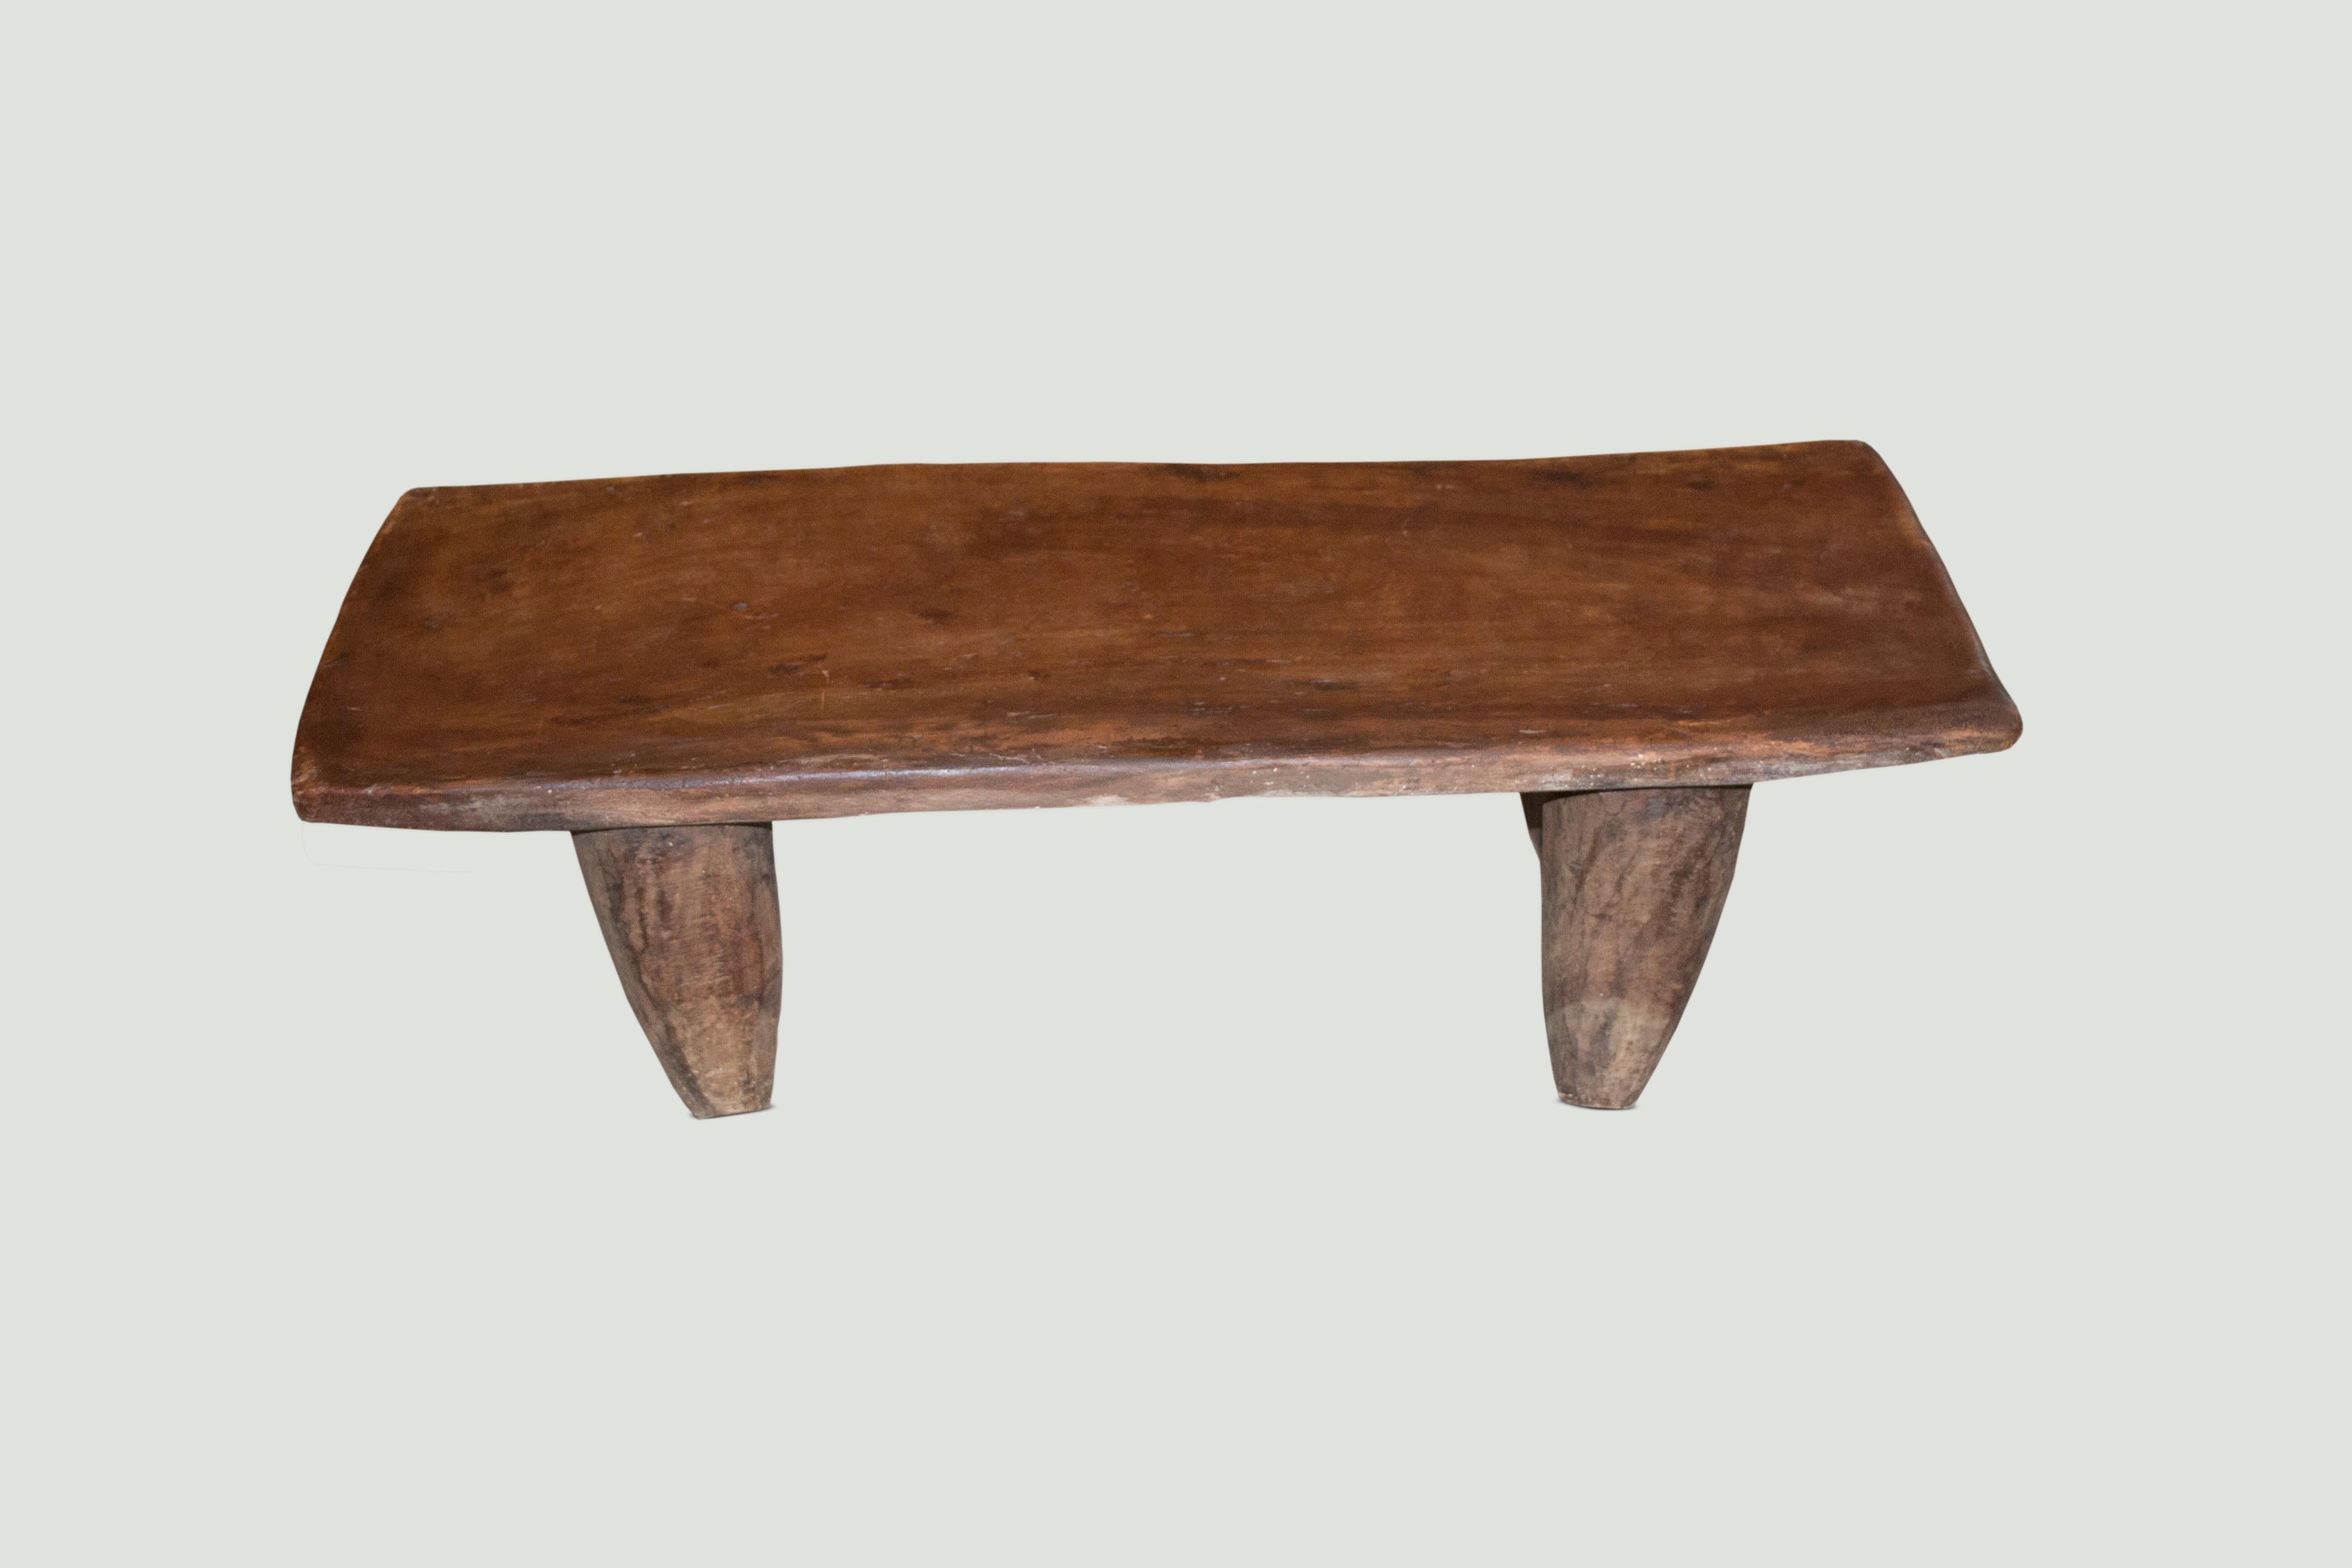 Antique bench or coffee table carved from a single piece of mahogany wood.

This bench or coffee table was sourced in the spirit of wabi-sabi, a Japanese philosophy that beauty can be found in imperfection and impermanence. It’s a beauty of things